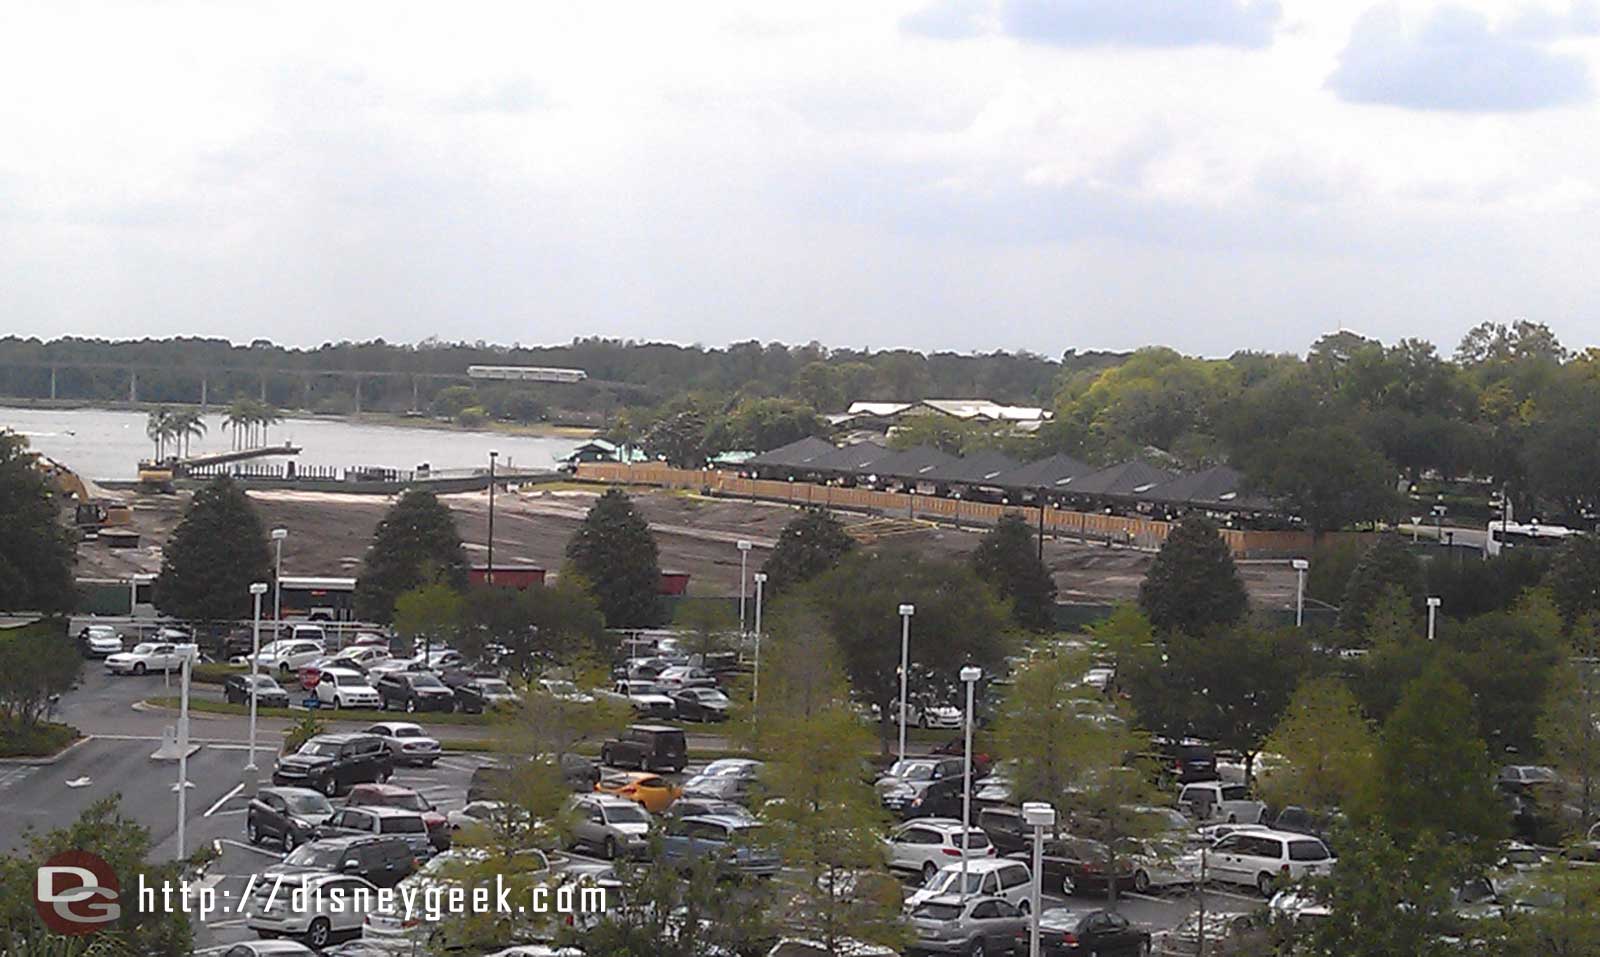 The new Magic Kingdom bus loop construction from the Contemporary